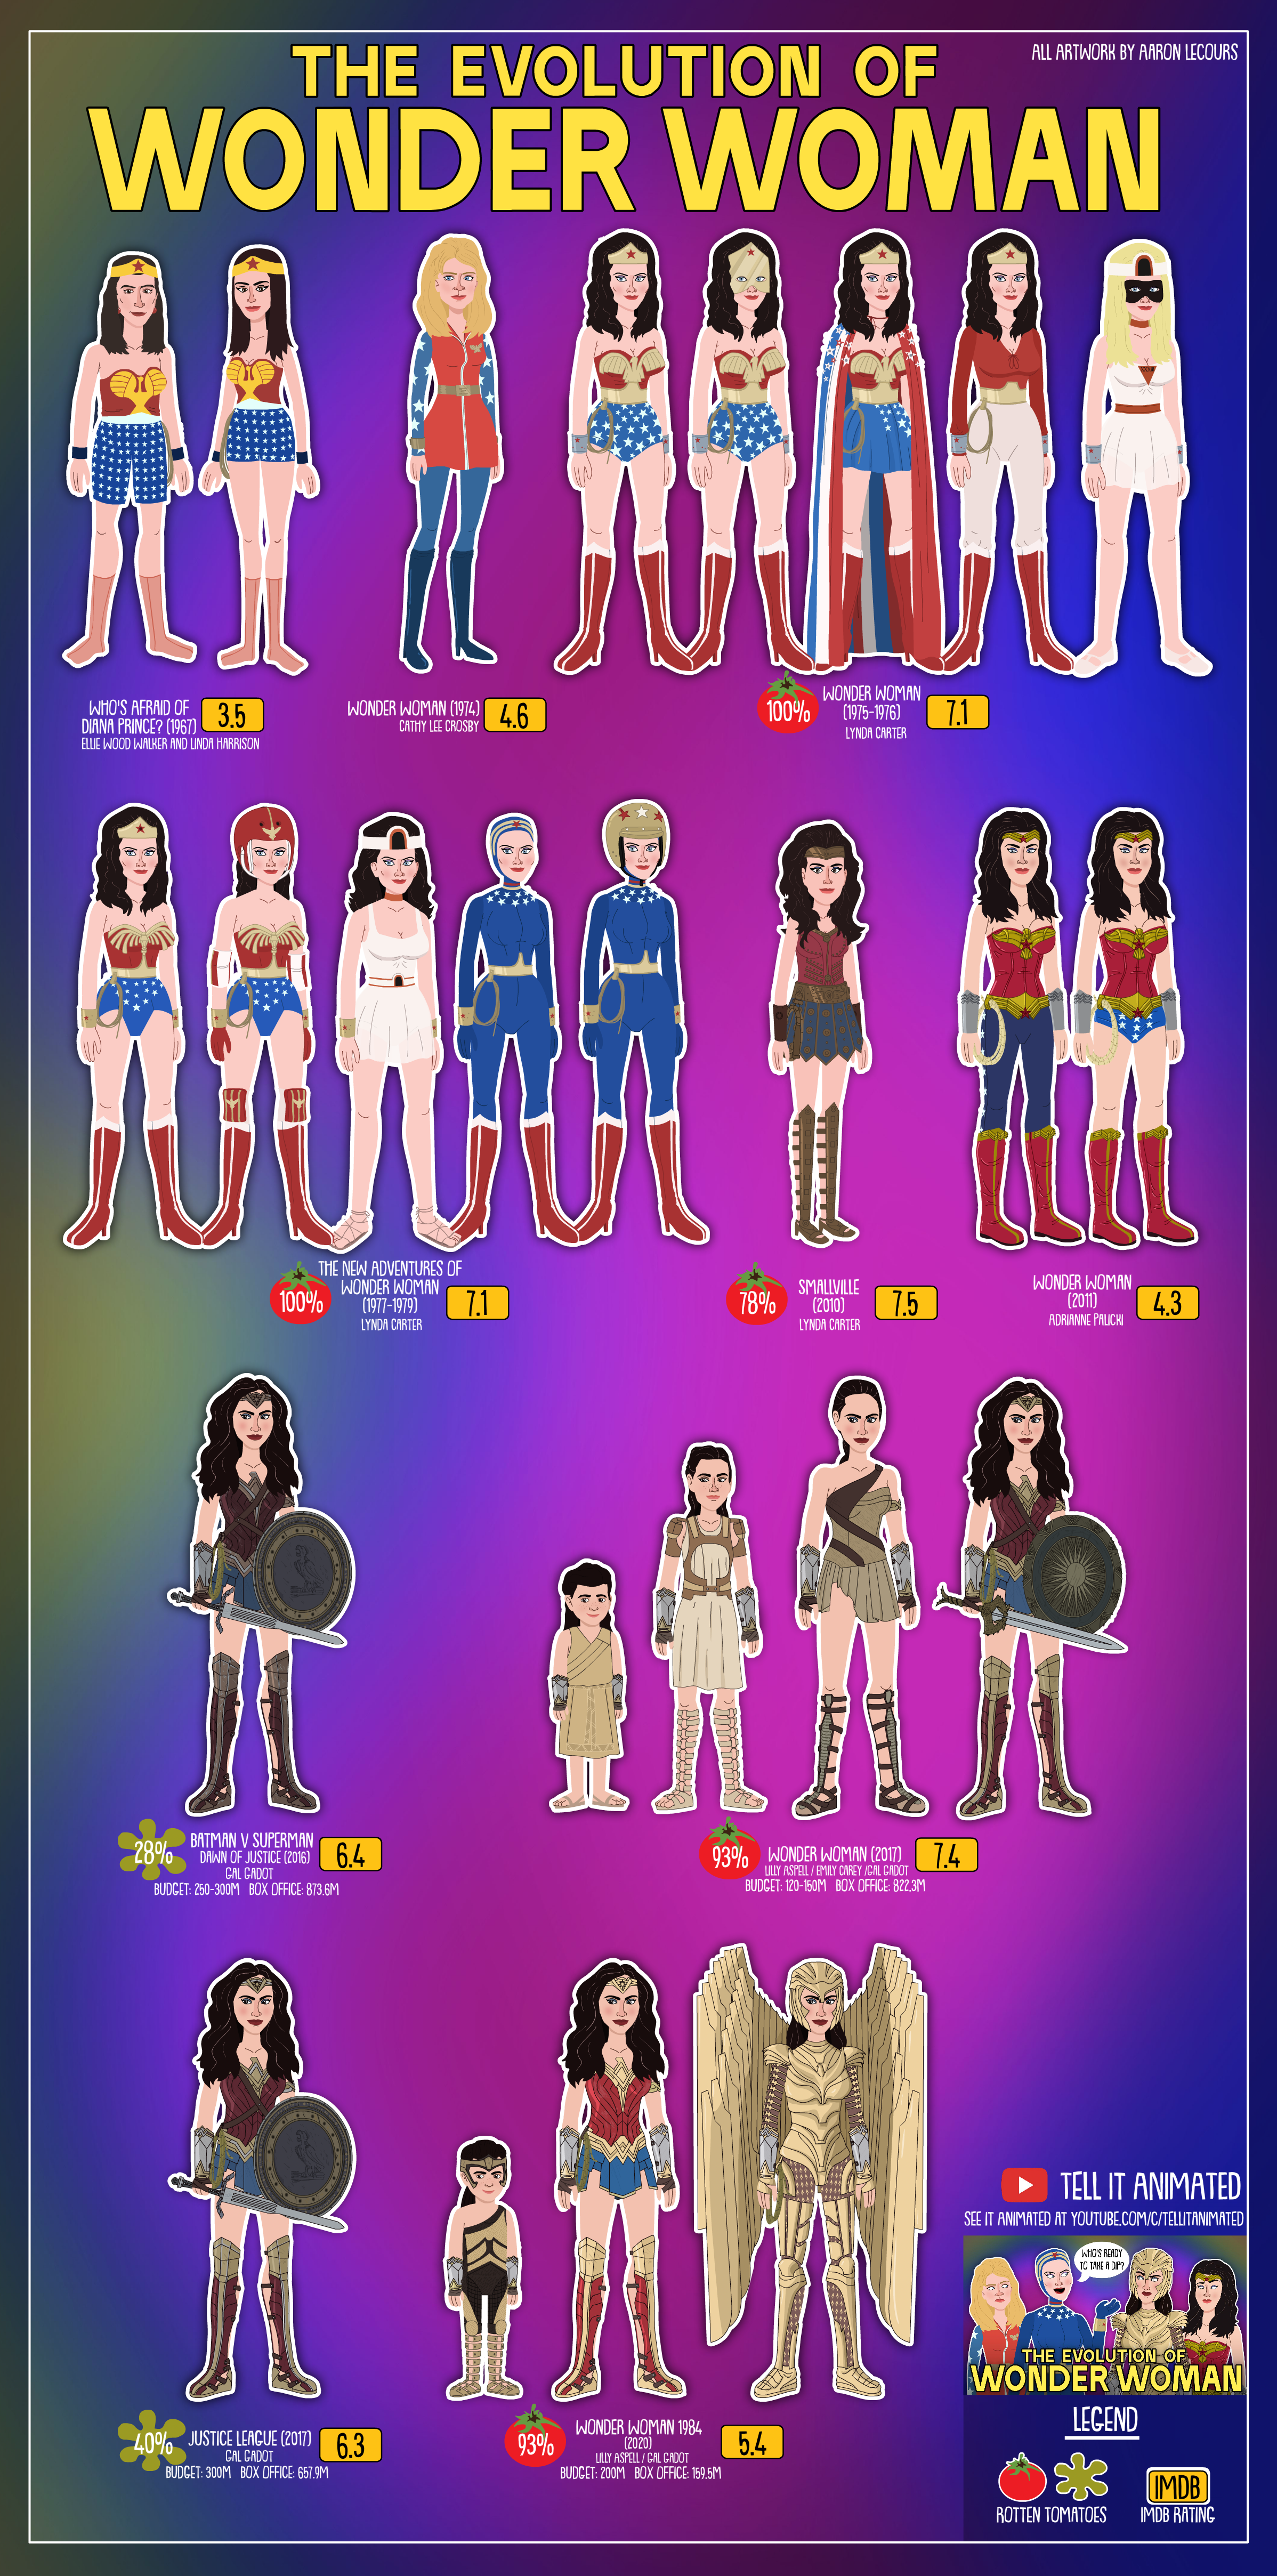 The Evolution of Wonder Lady (Illustrated Infographic)